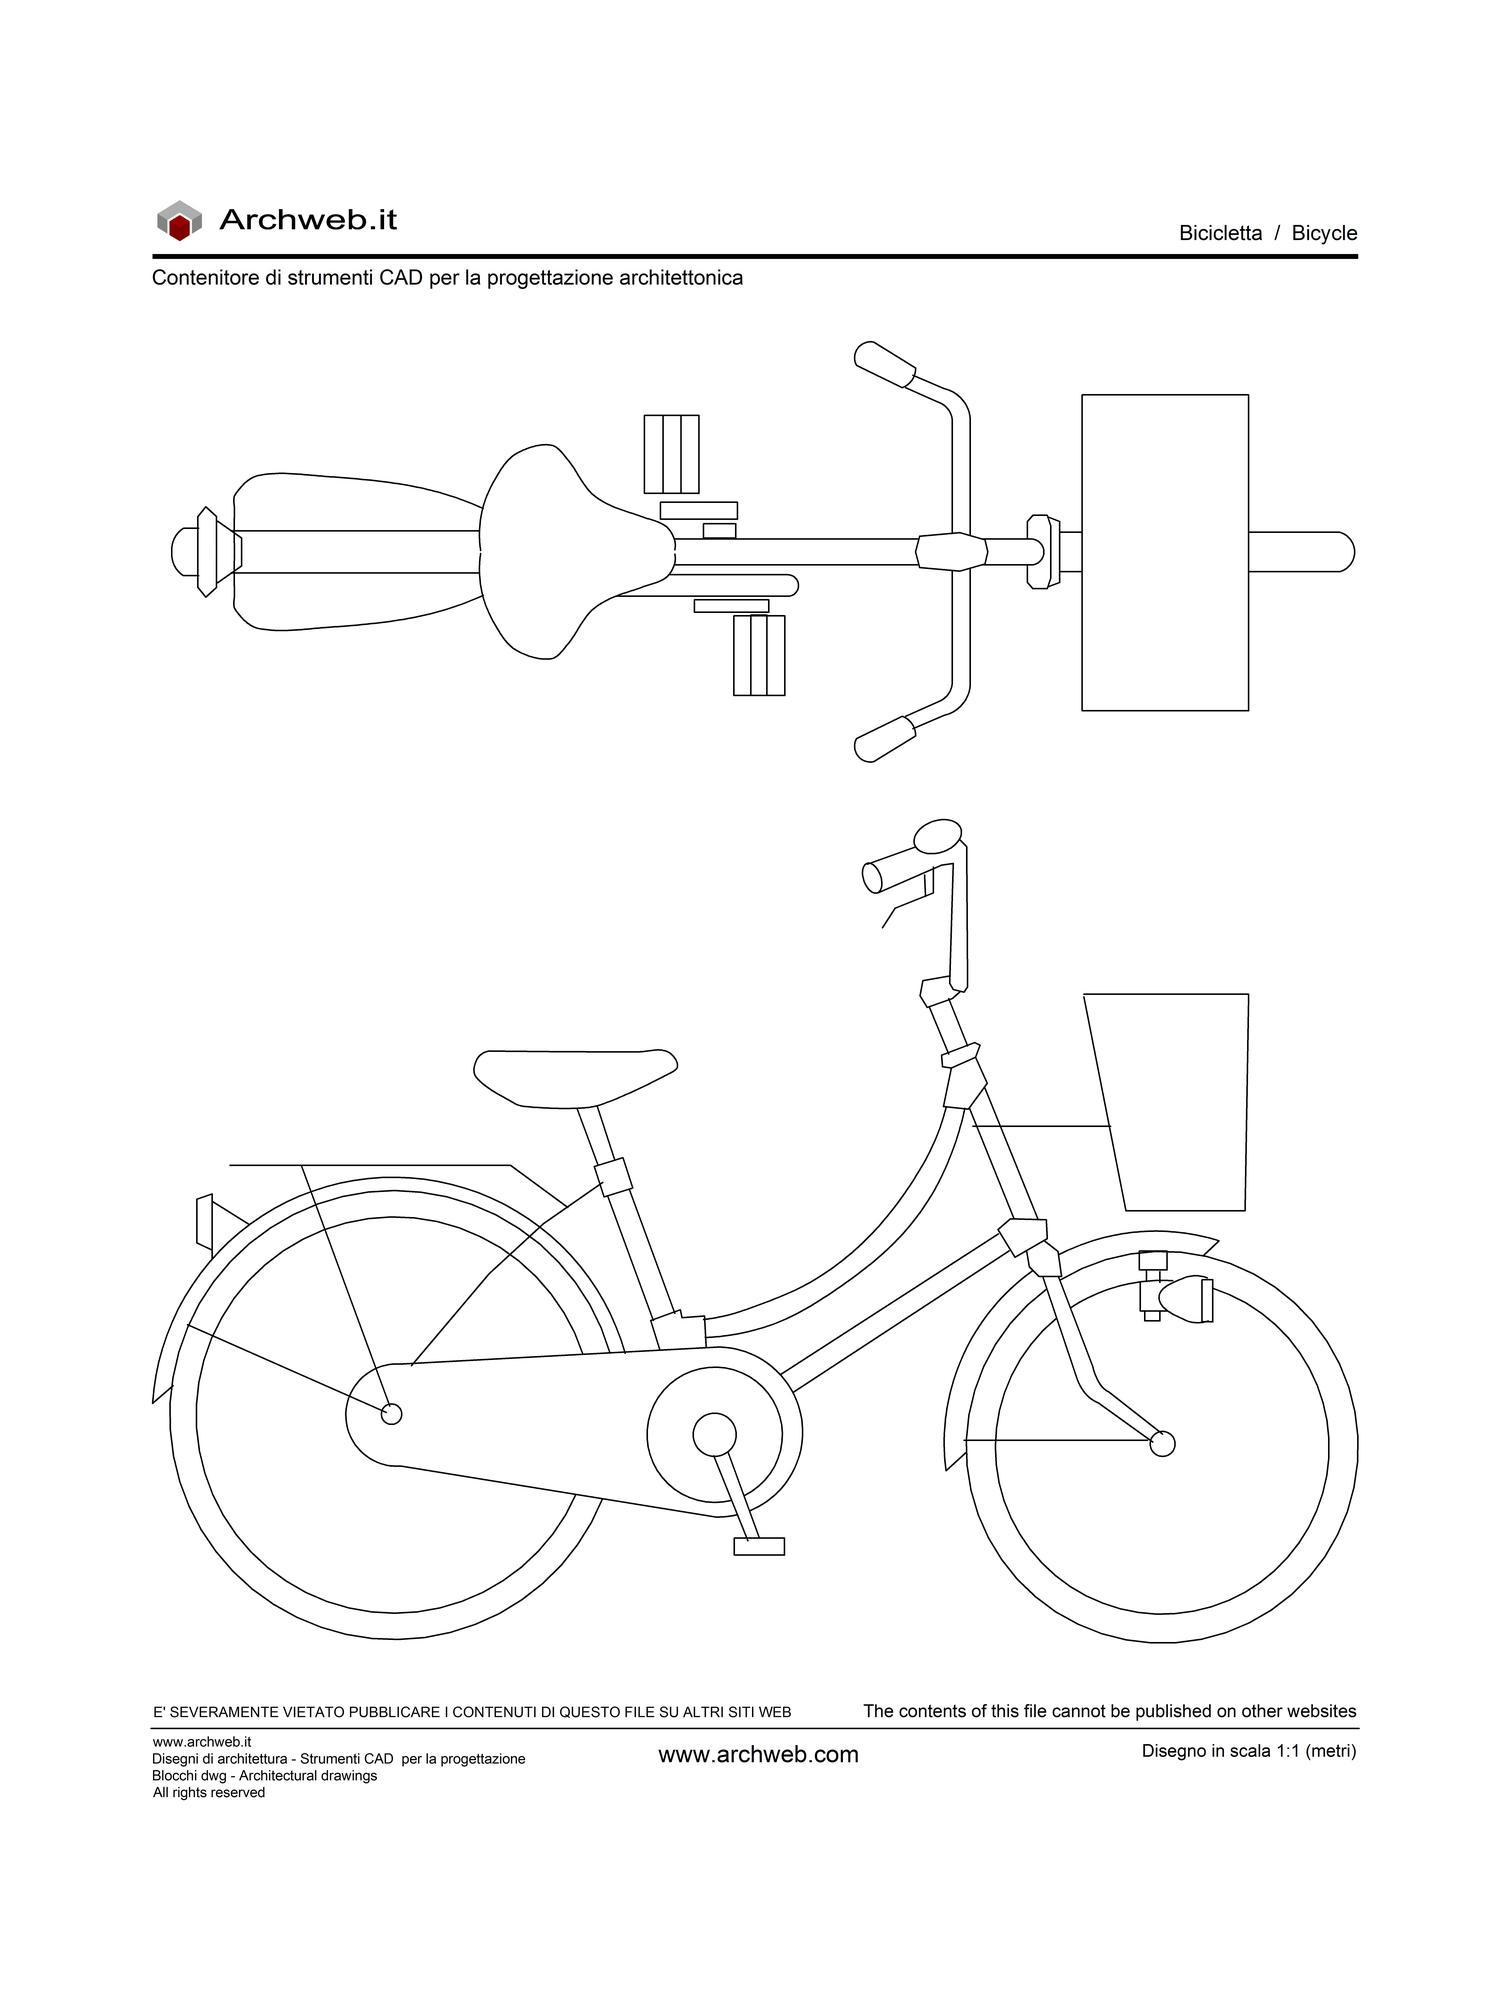 Drawing plan and elevation of a bicycle